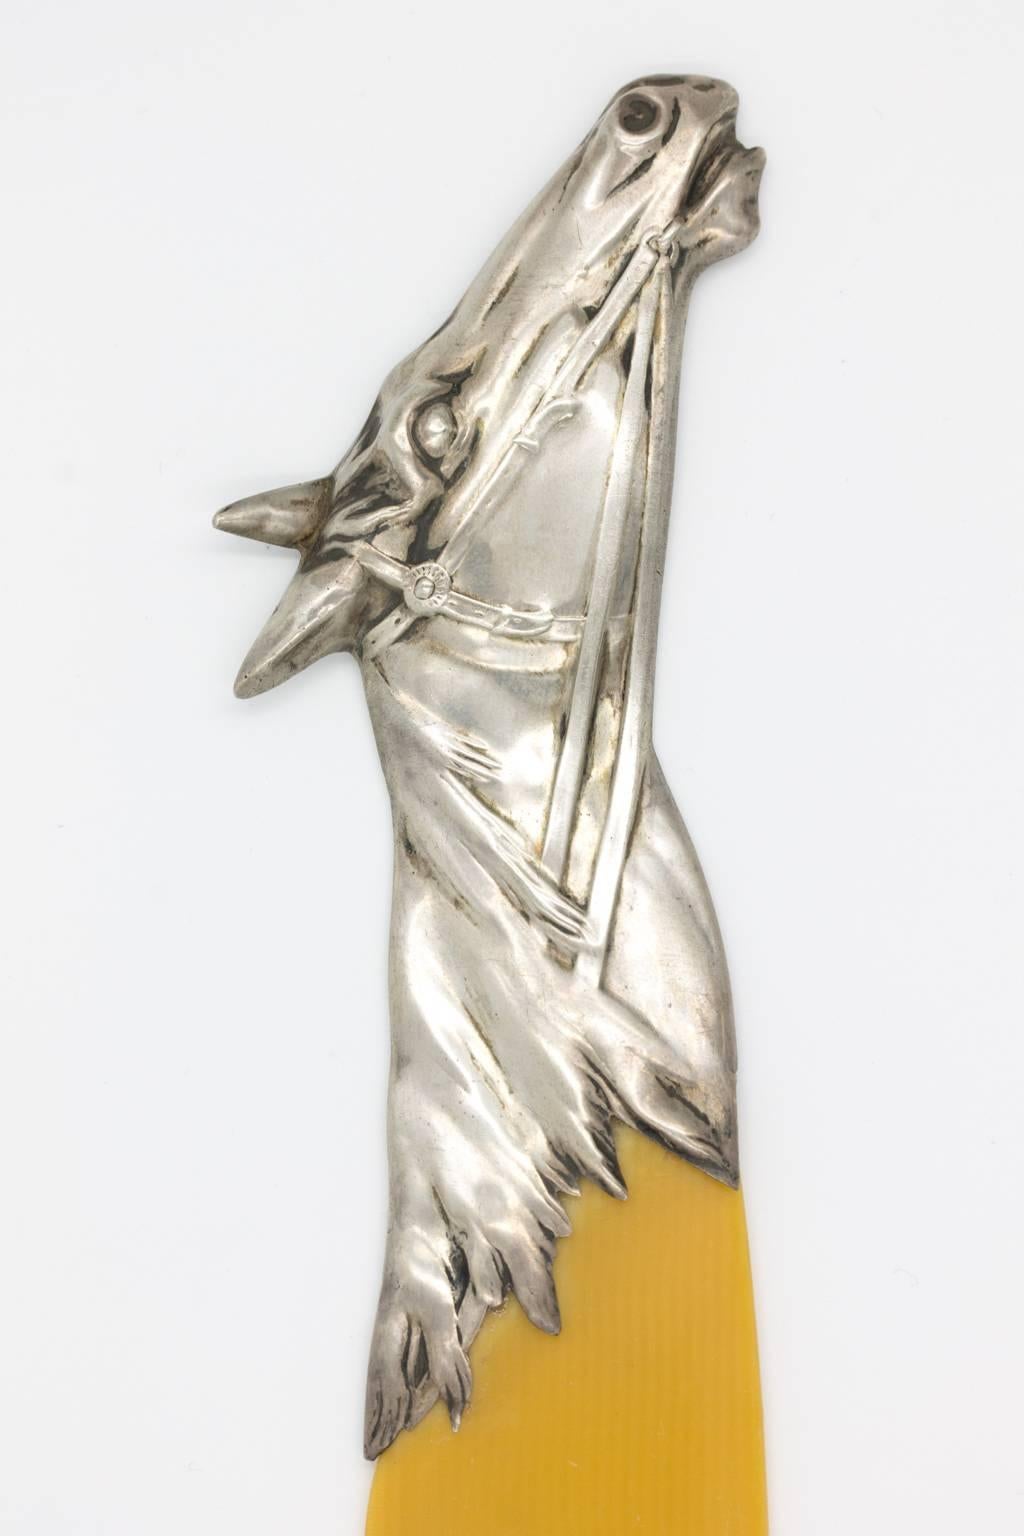 Beautifully crafted, probably Norwegian, 830 silver and celluloid letter opener or page turner.